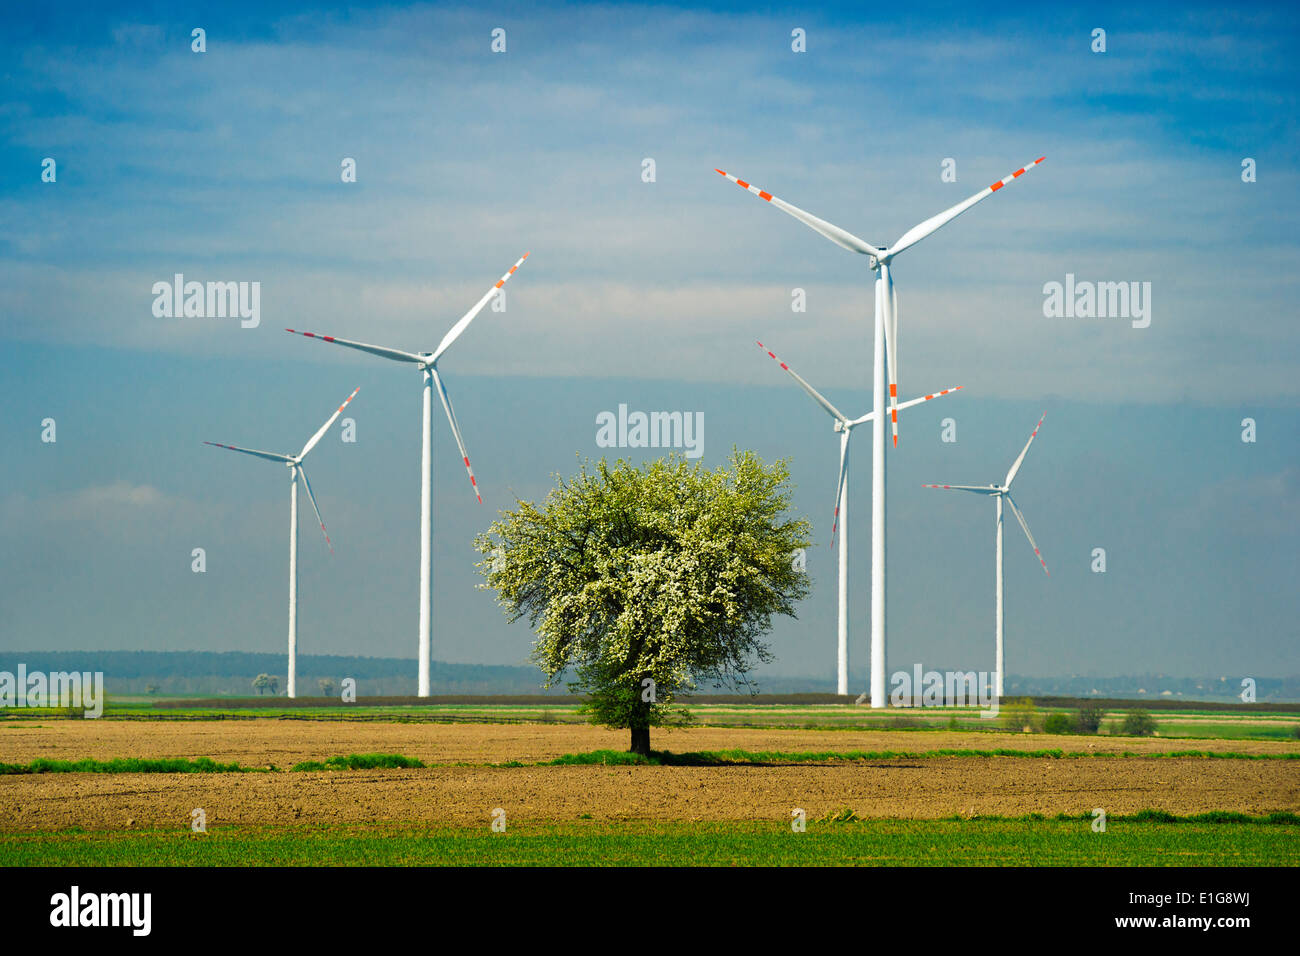 Wind turbine (farm, windpark, electric windmill) and a tree on the field and blue sky. Stock Photo